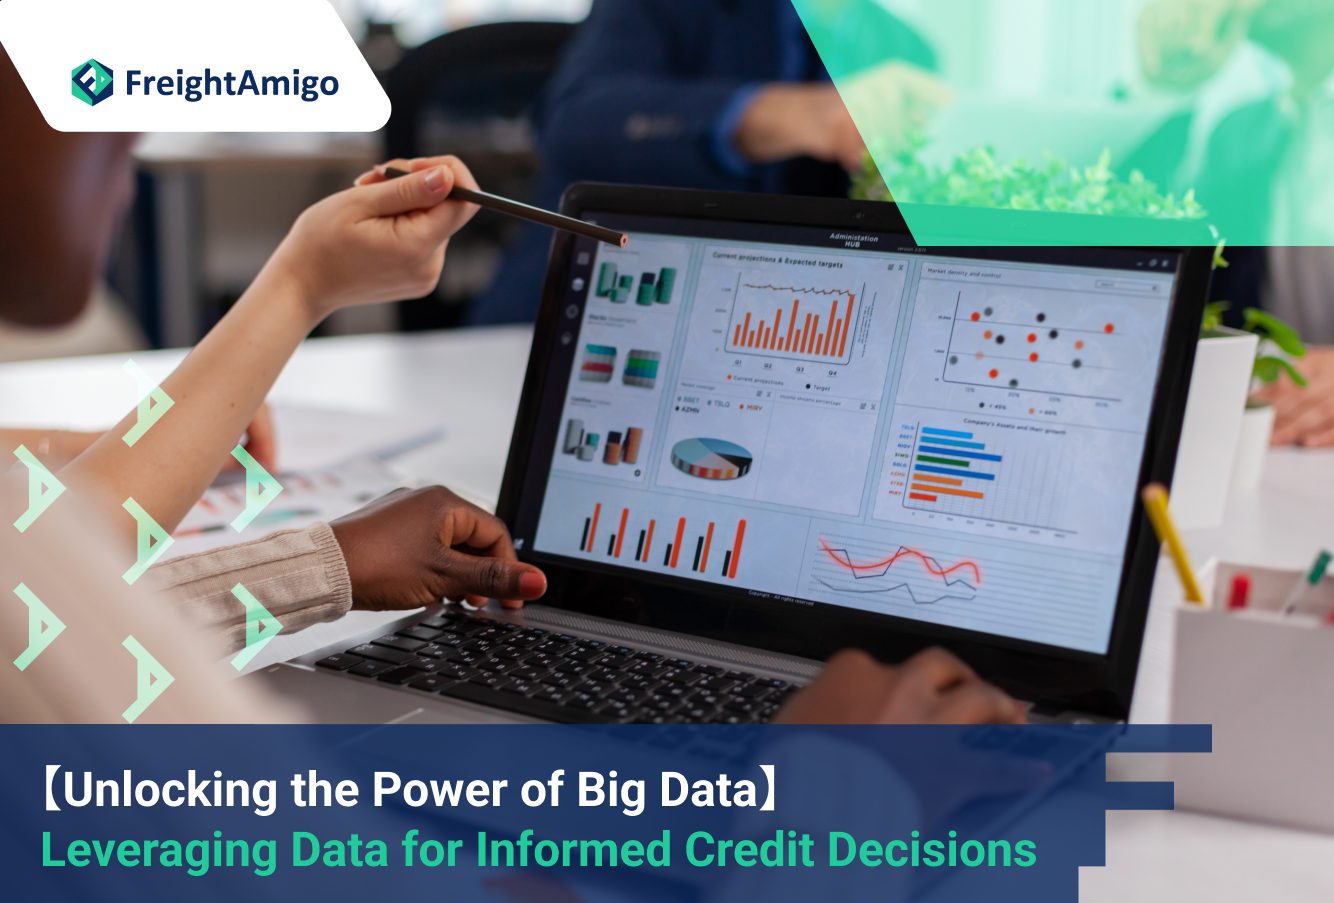 【Unlocking the Power of Big Data】 Leveraging Data for Informed Credit Decisions